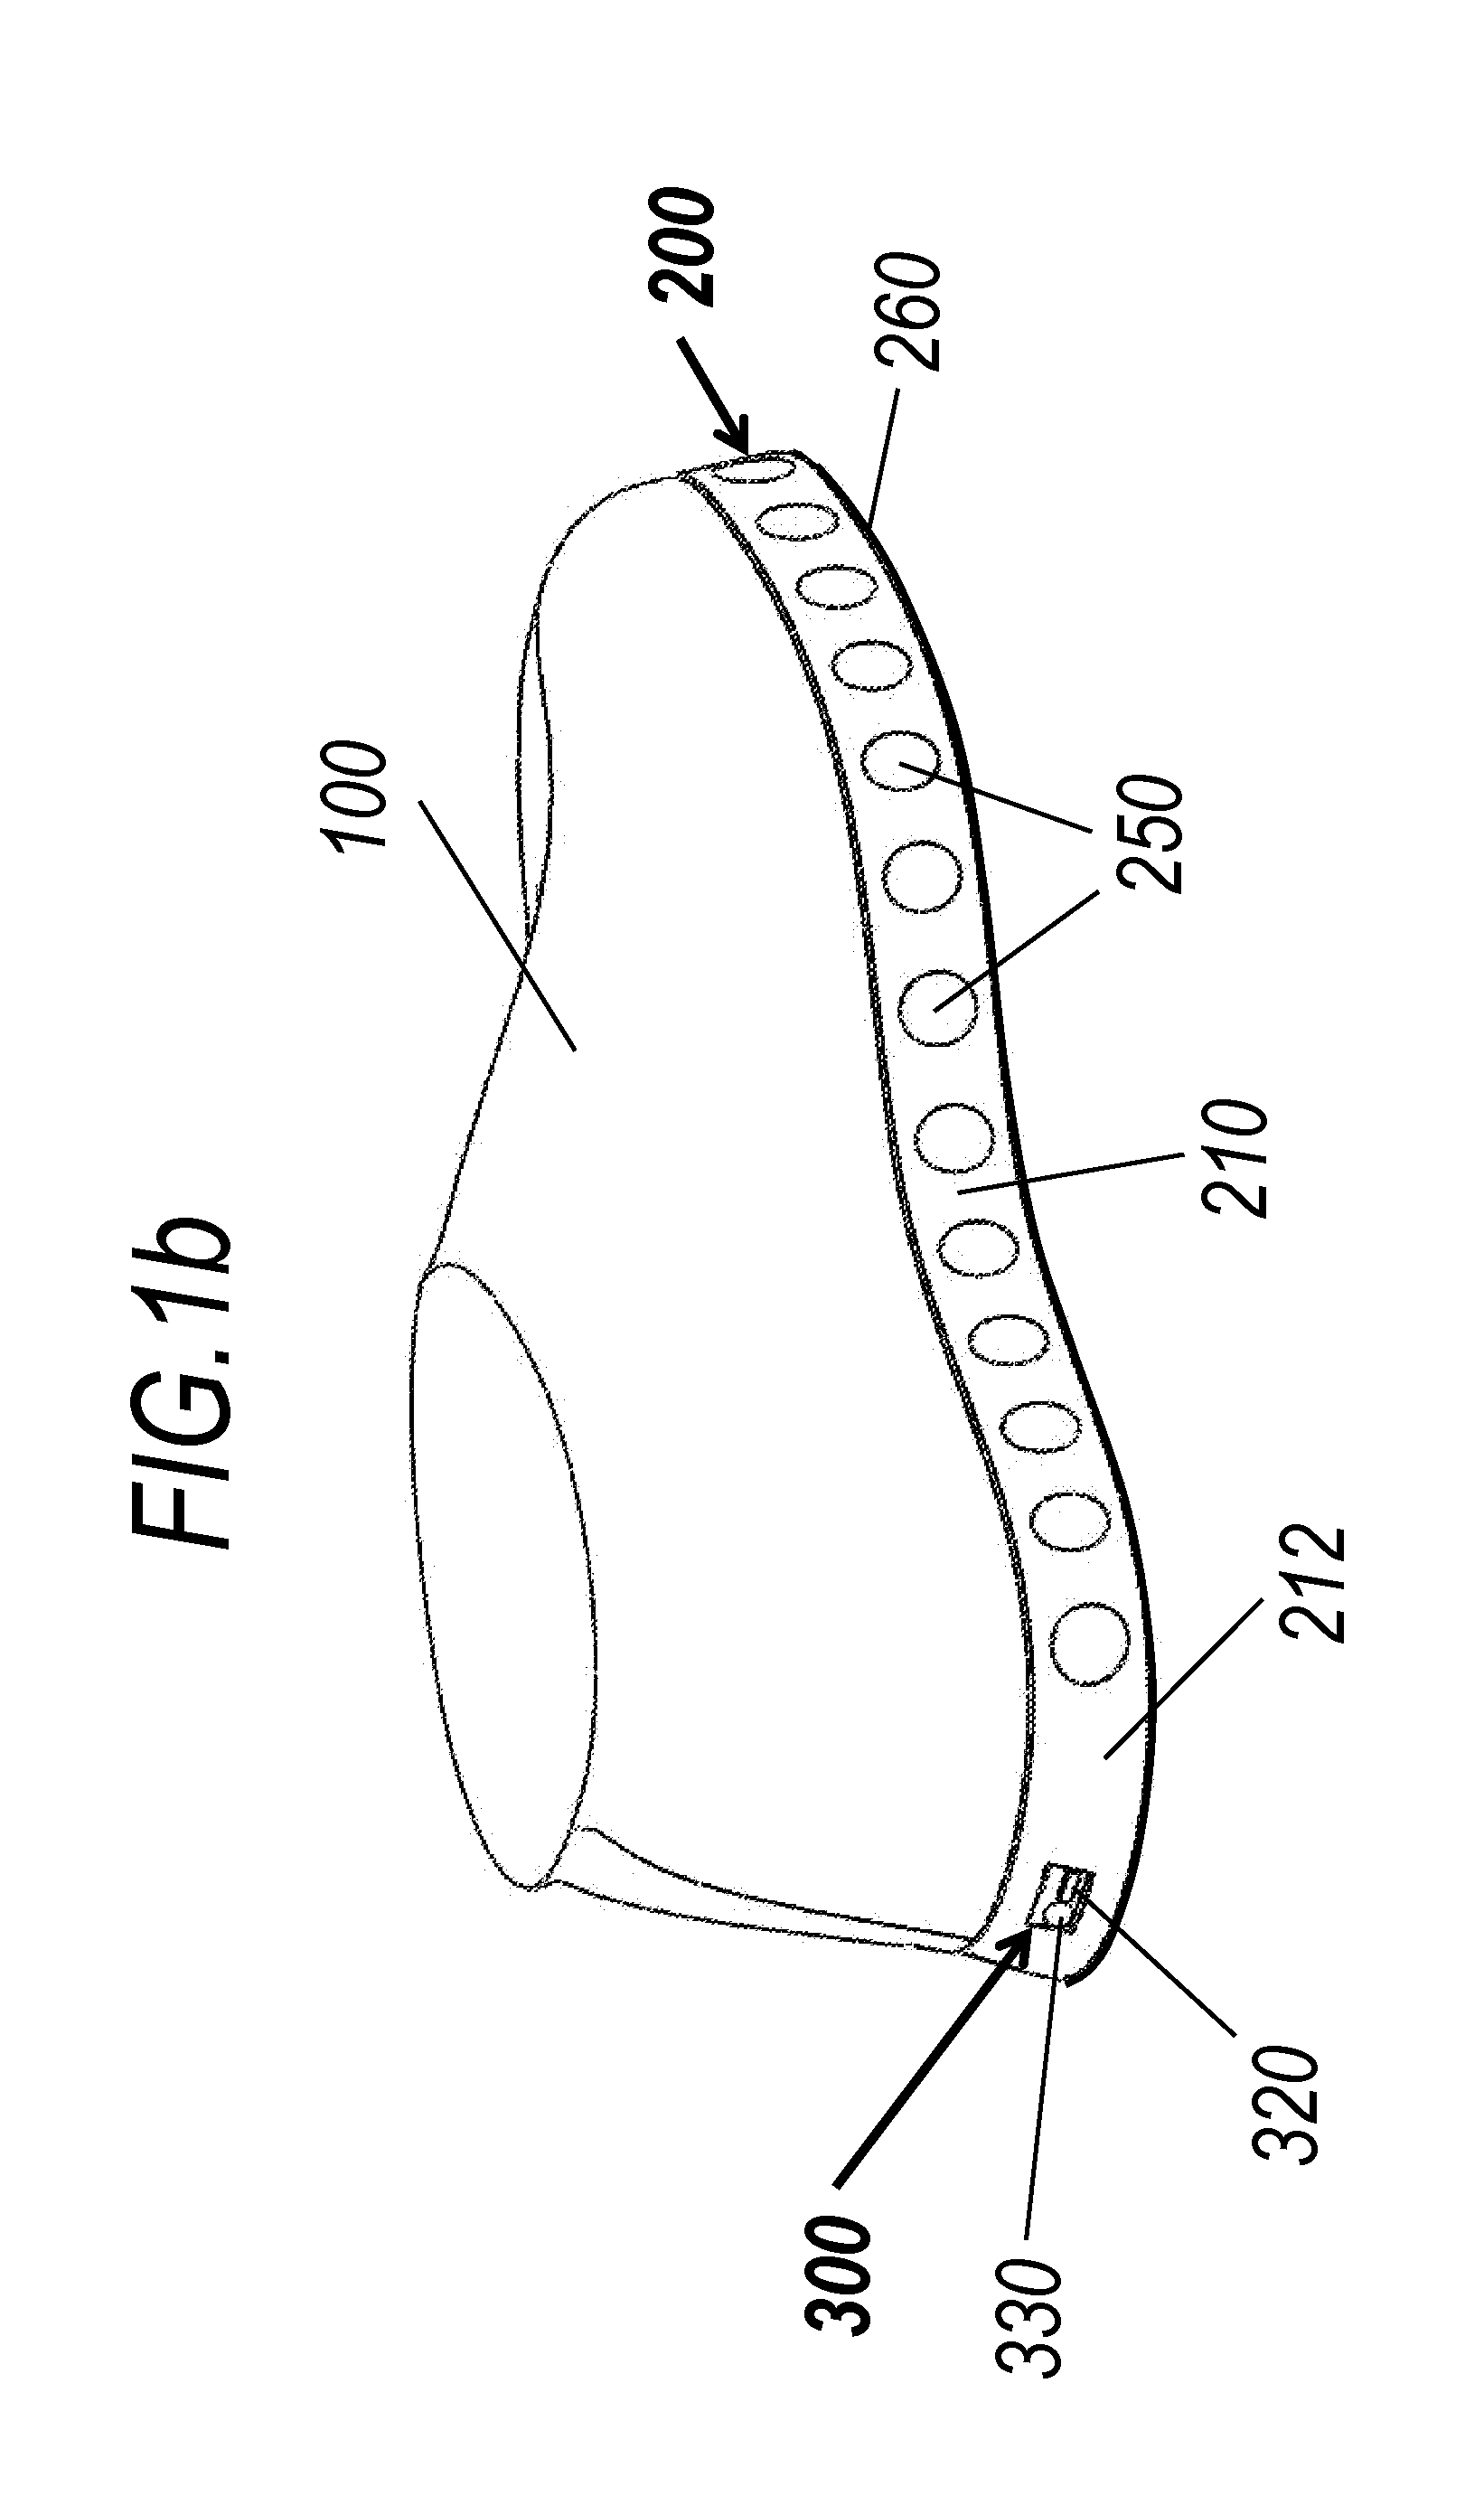 Footwear with Insertable Lighting Assembly